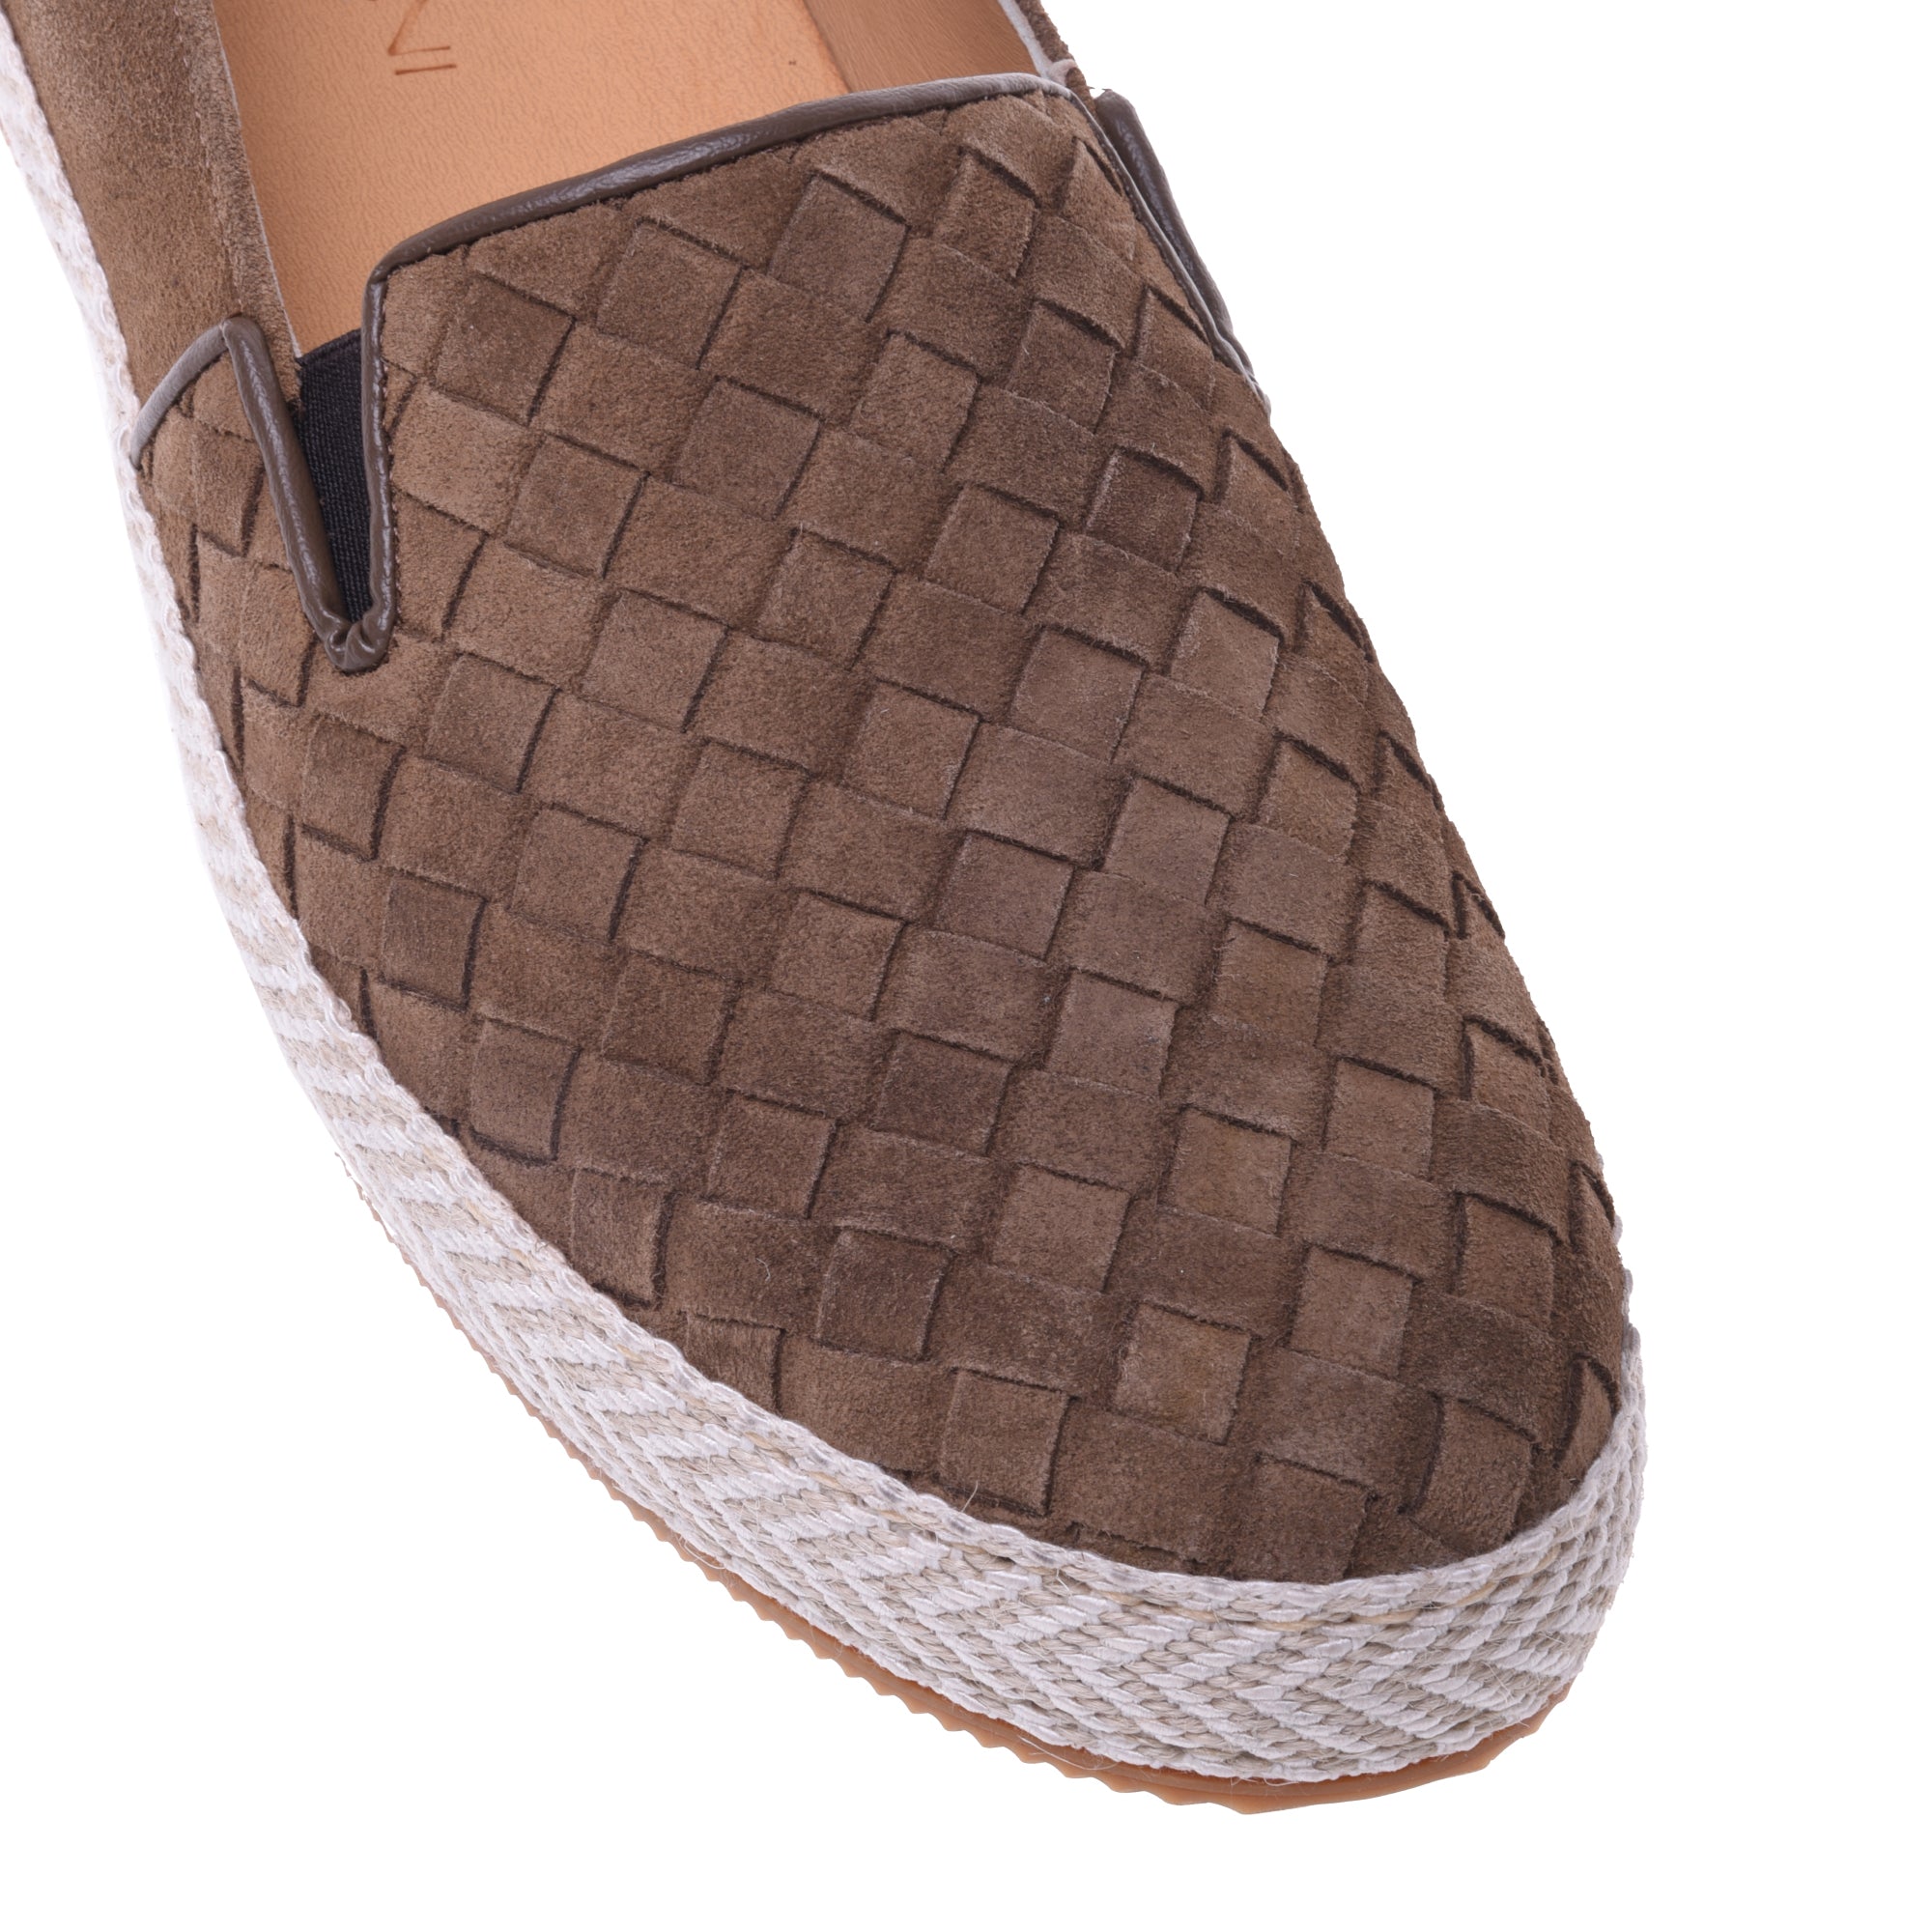 Espadrilles in taupe woven suede